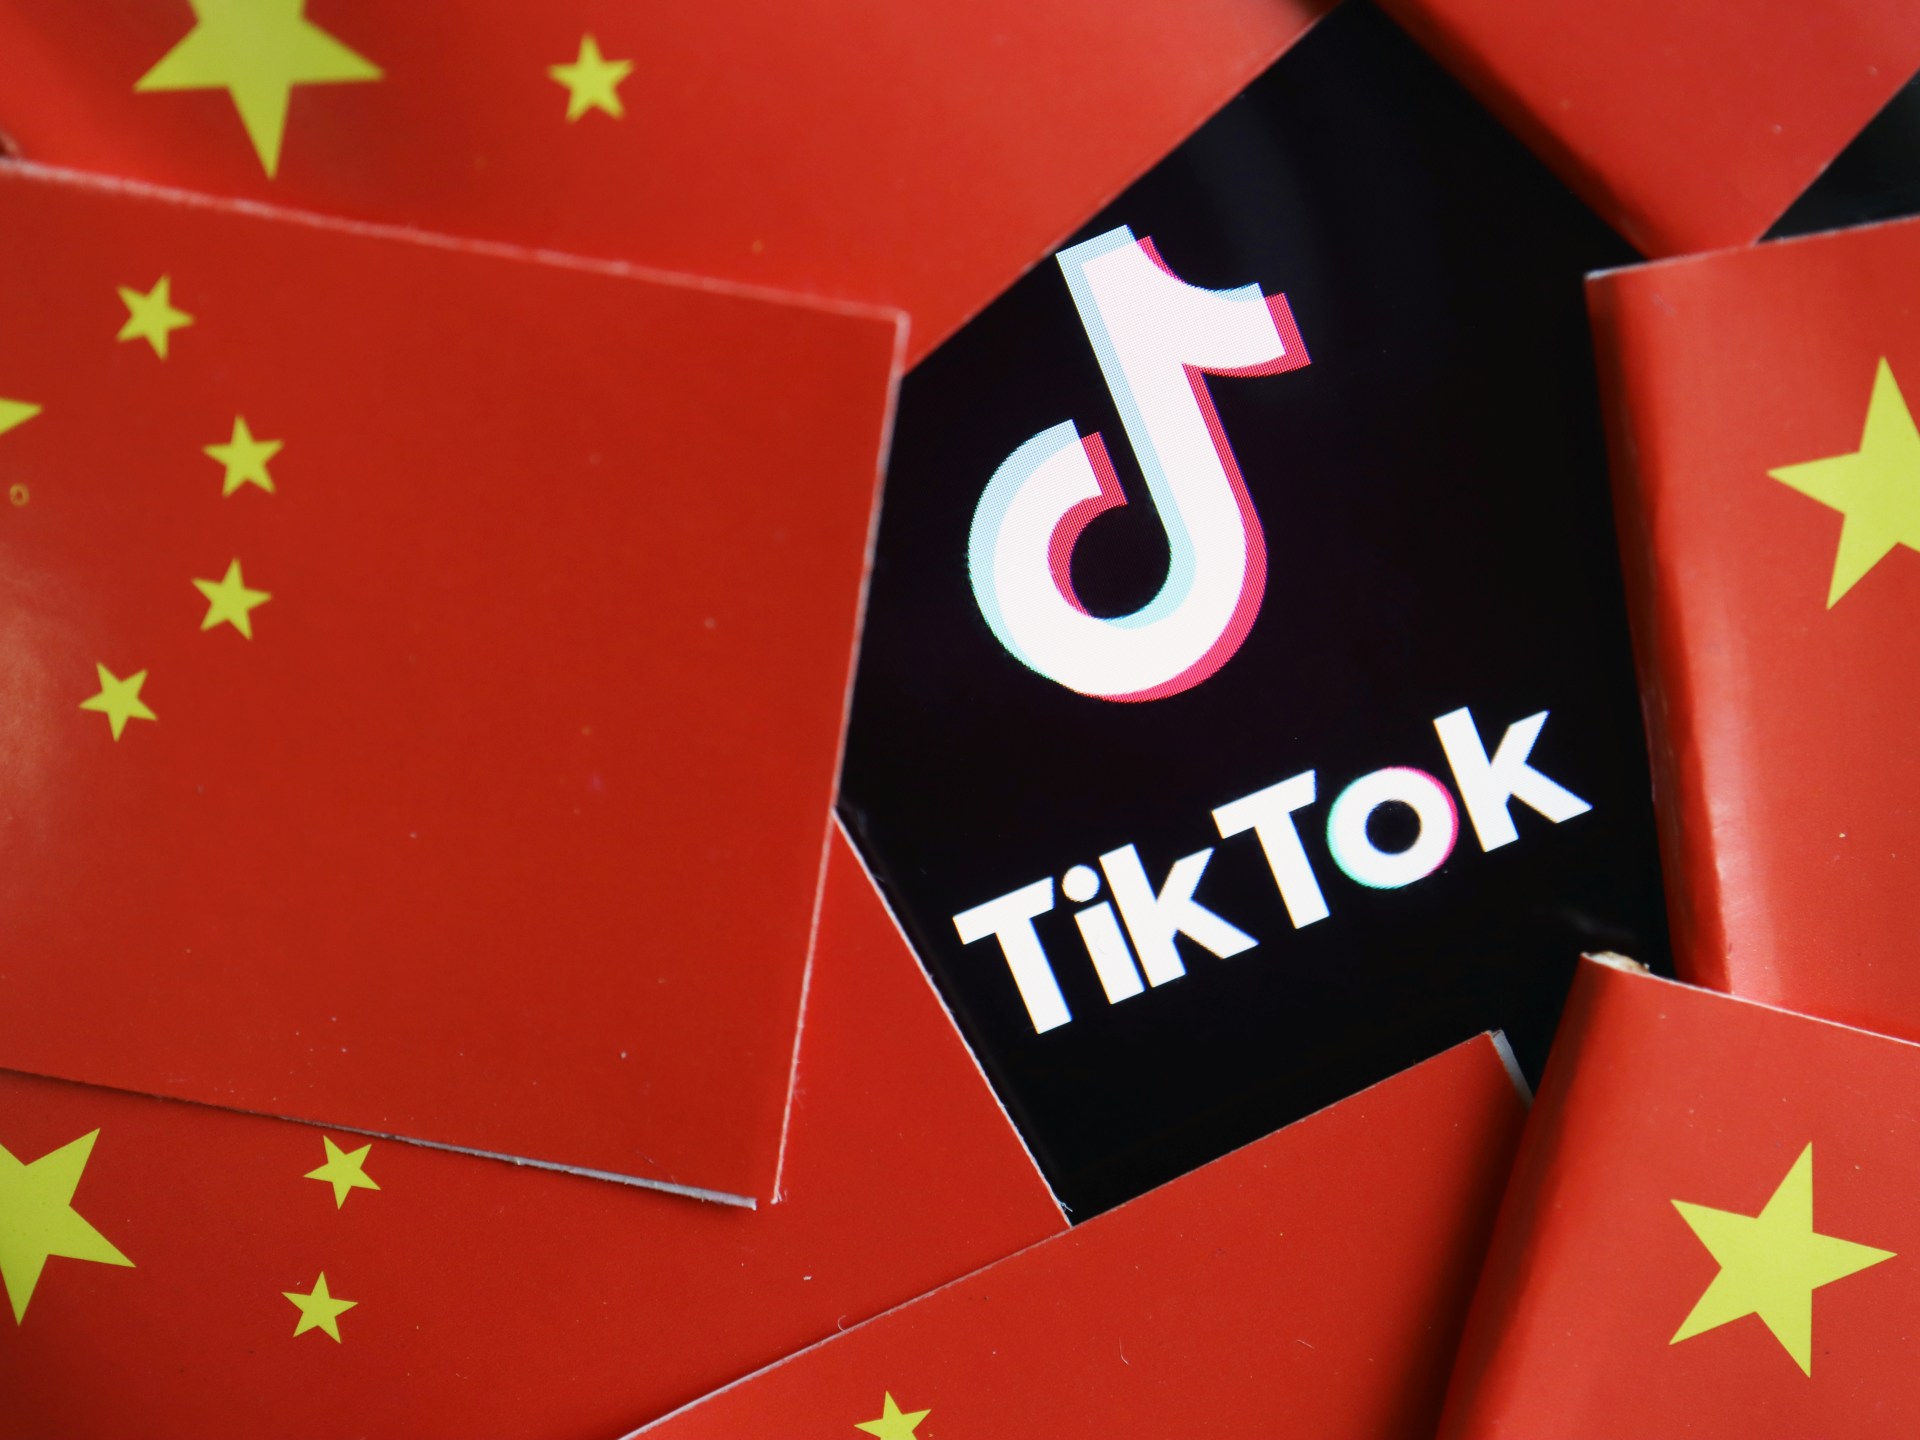 CIA Finds 'No Evidence' Chinese Government Has Accessed TikTok